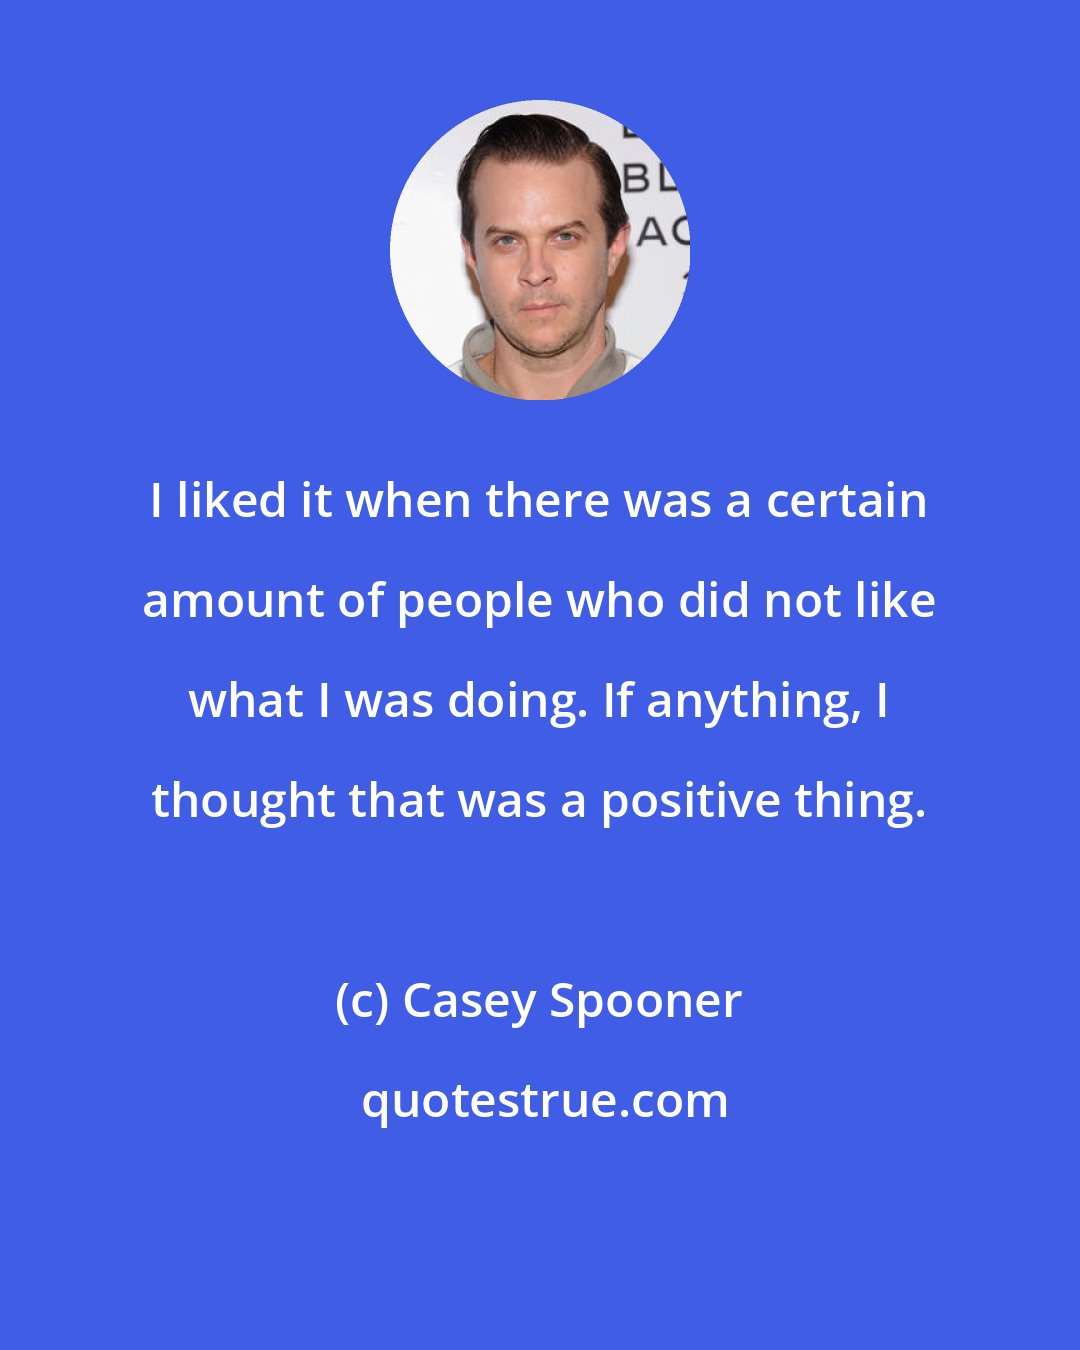 Casey Spooner: I liked it when there was a certain amount of people who did not like what I was doing. If anything, I thought that was a positive thing.